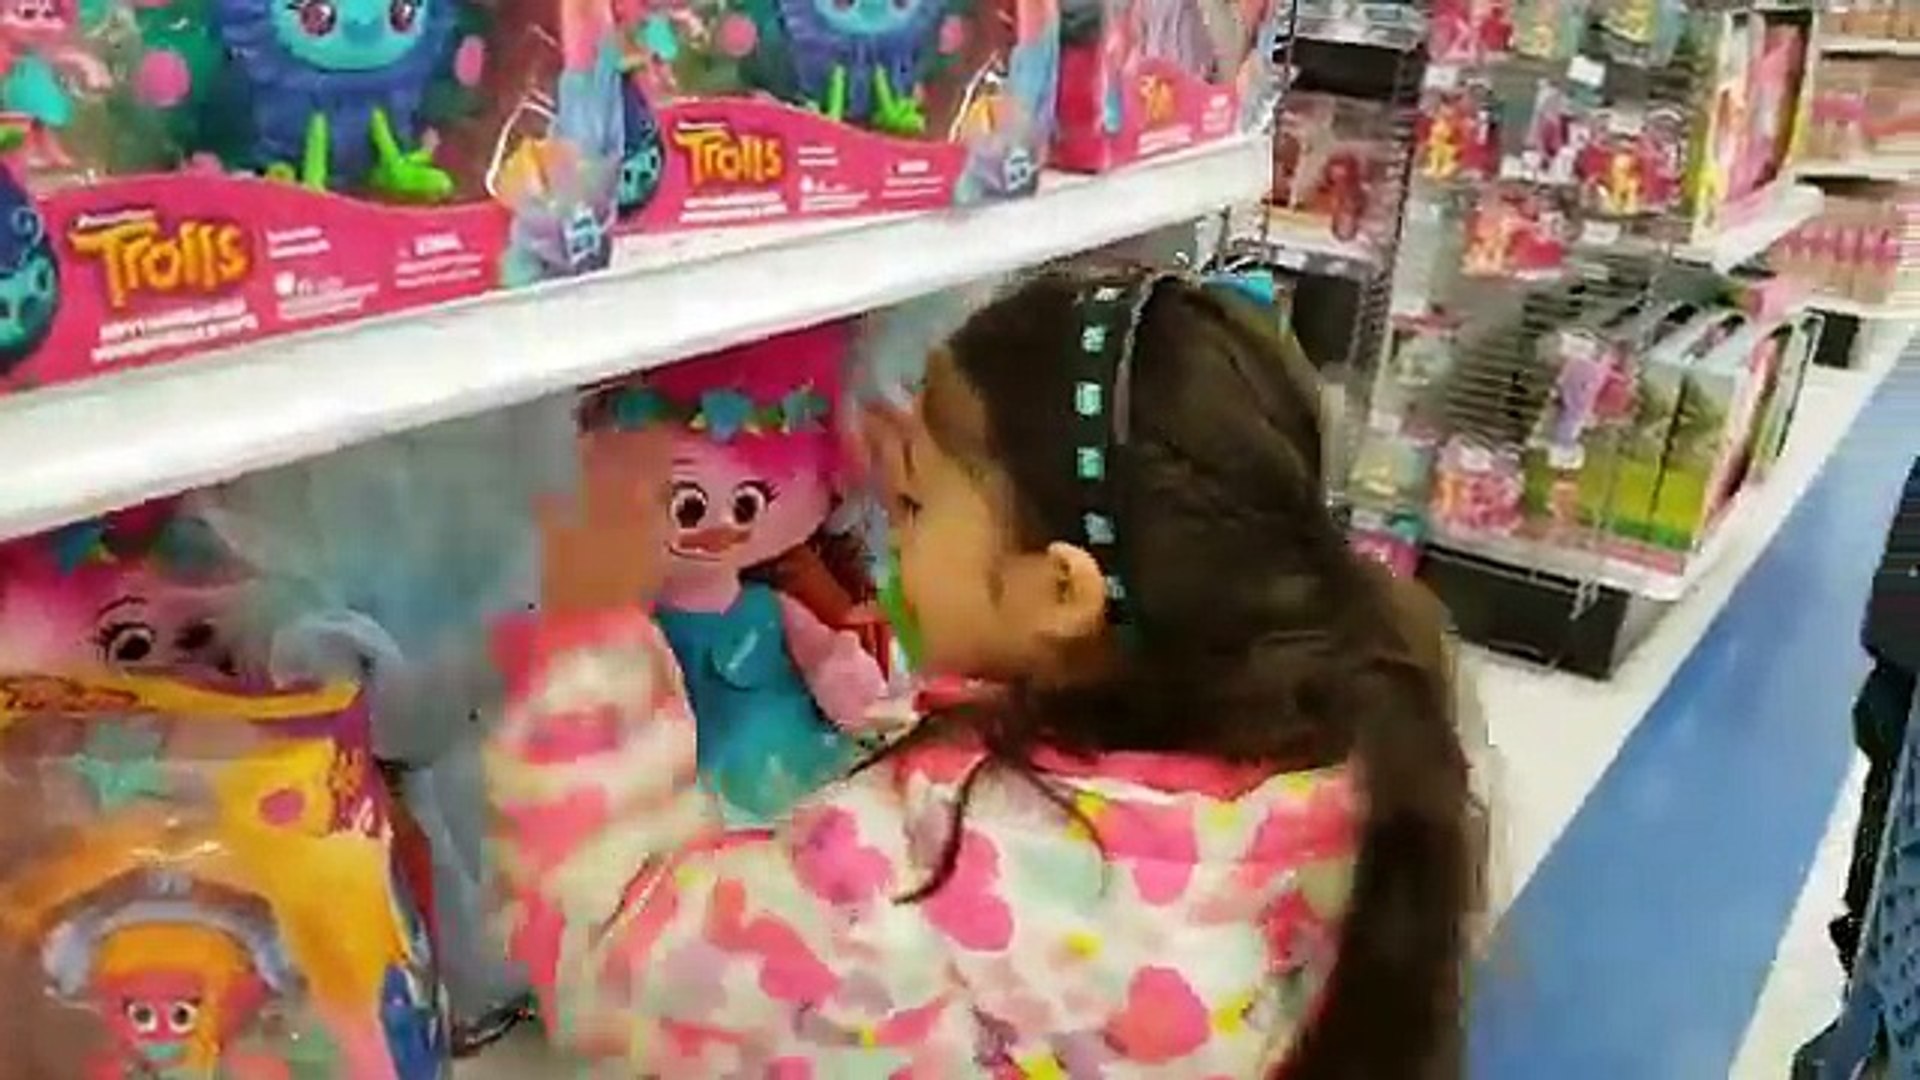 BAD BABY Lost in Toys R Us Kids Freaks Out! HZHtube Kids Fun - Dailymotion  Video